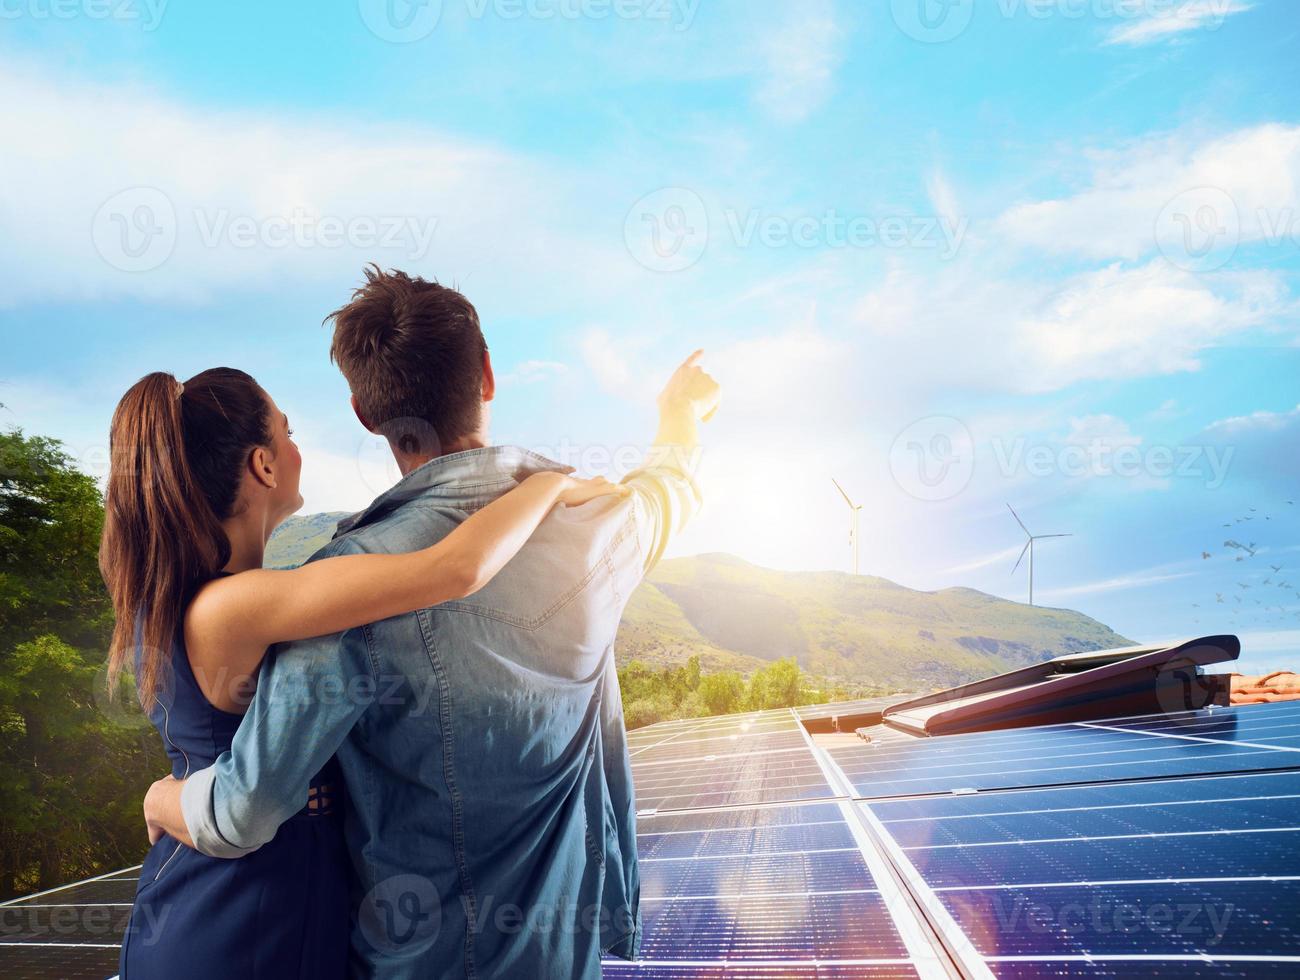 Family uses renewable energy system with solar panel photo